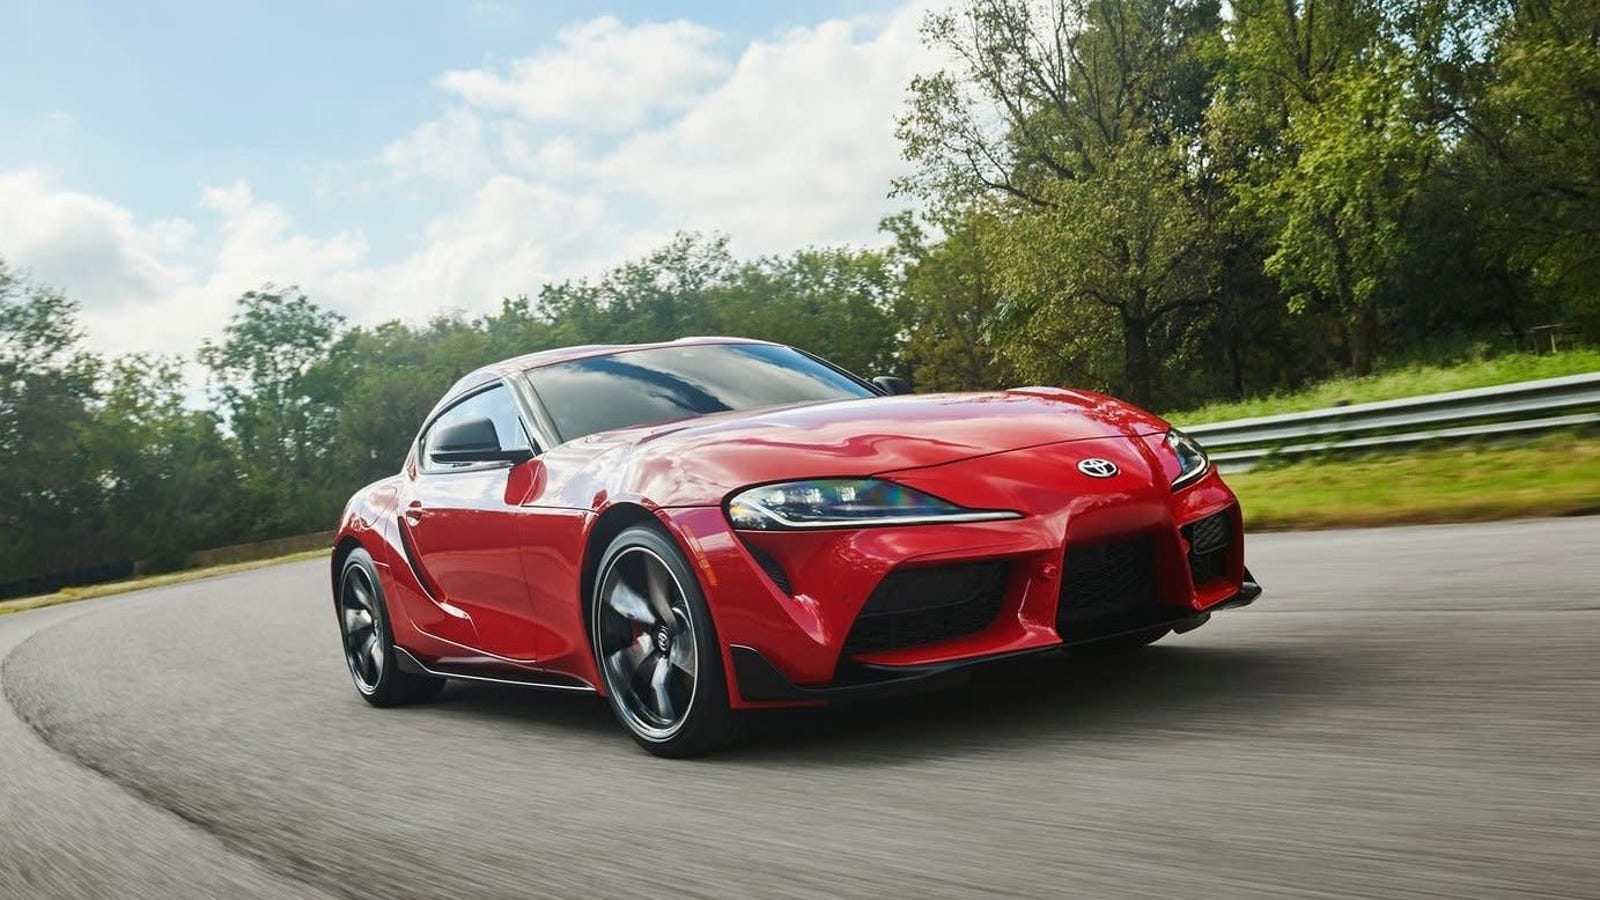 We're Driving the 2020 Toyota Supra. What Do You Want to Know? - Jalopnik thumbnail